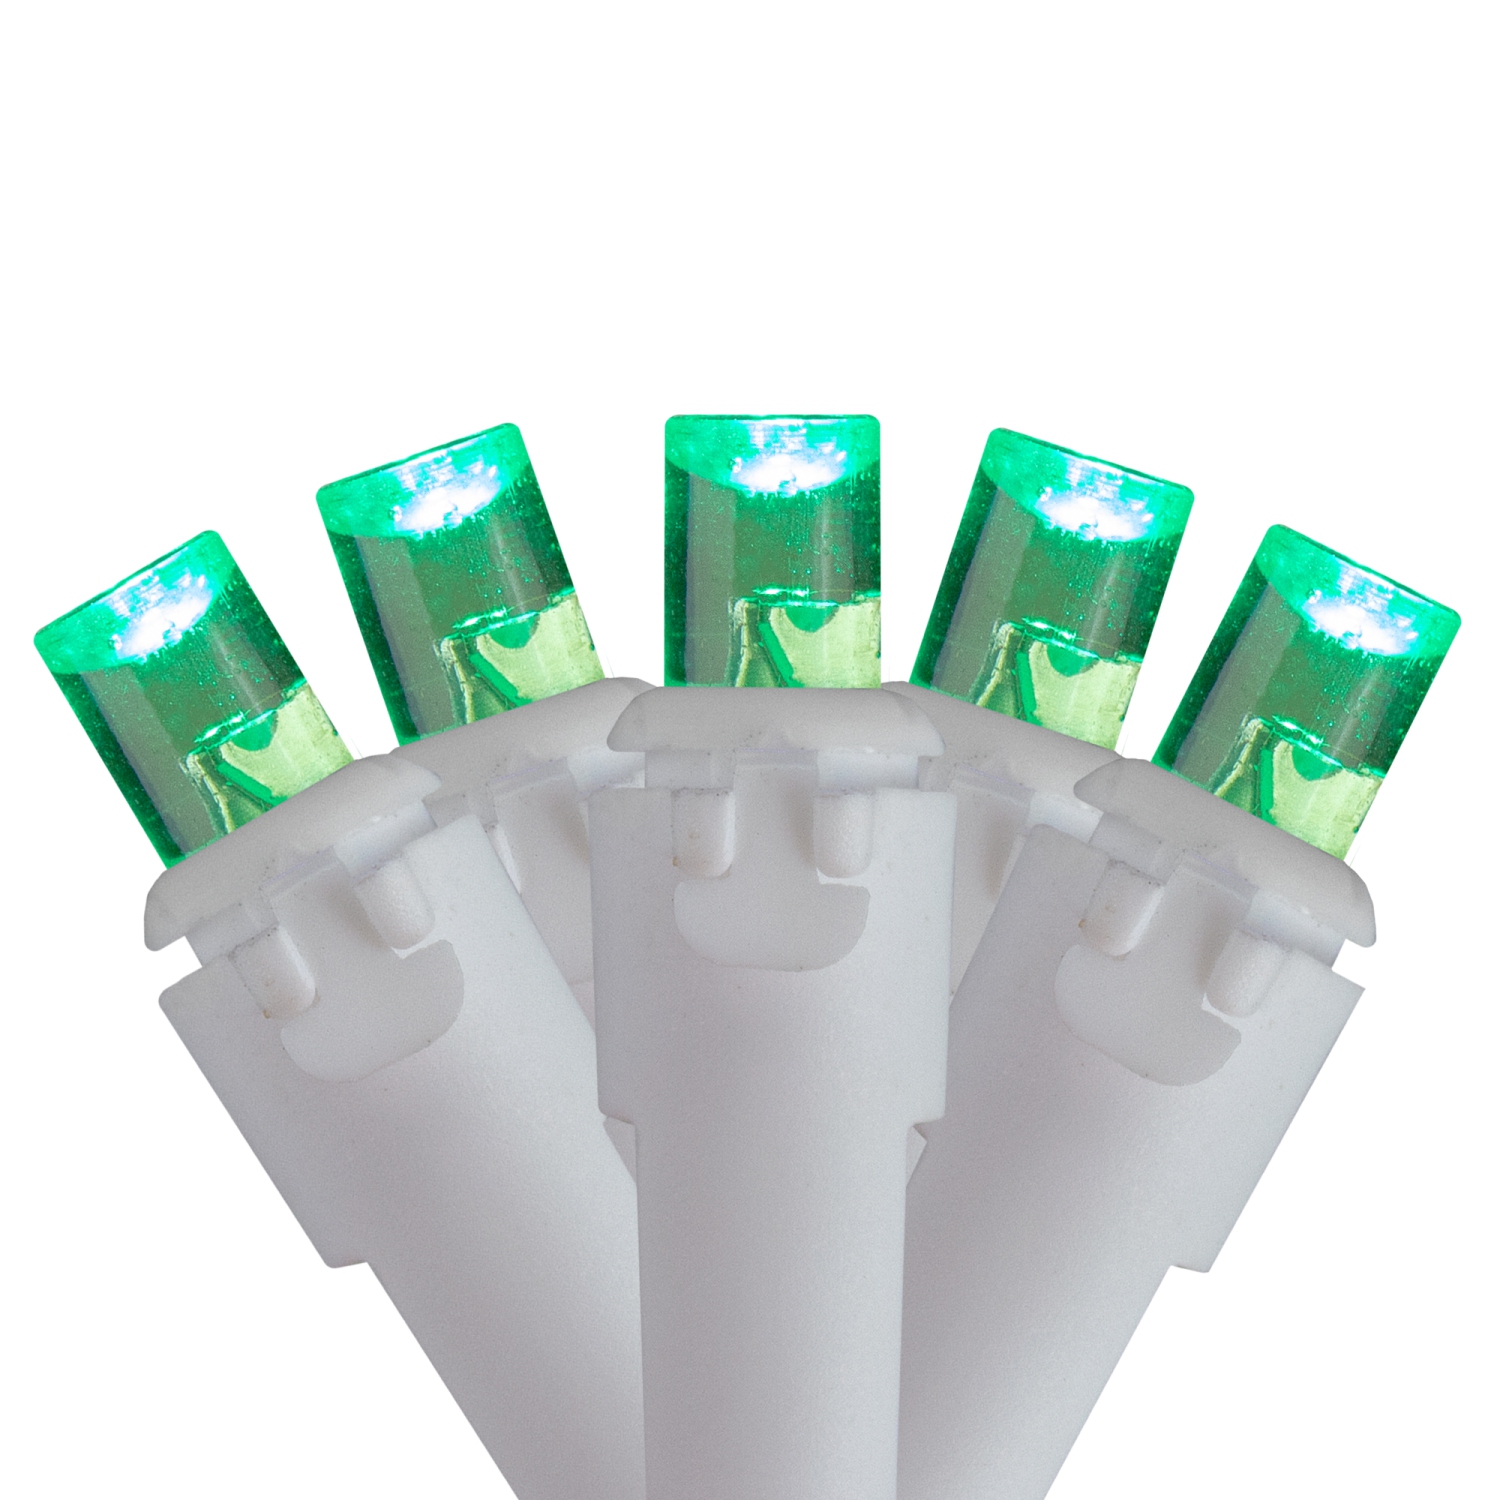 70 Green LED Wide Angle Icicle Christmas Lights - 5.25 ft White Wire